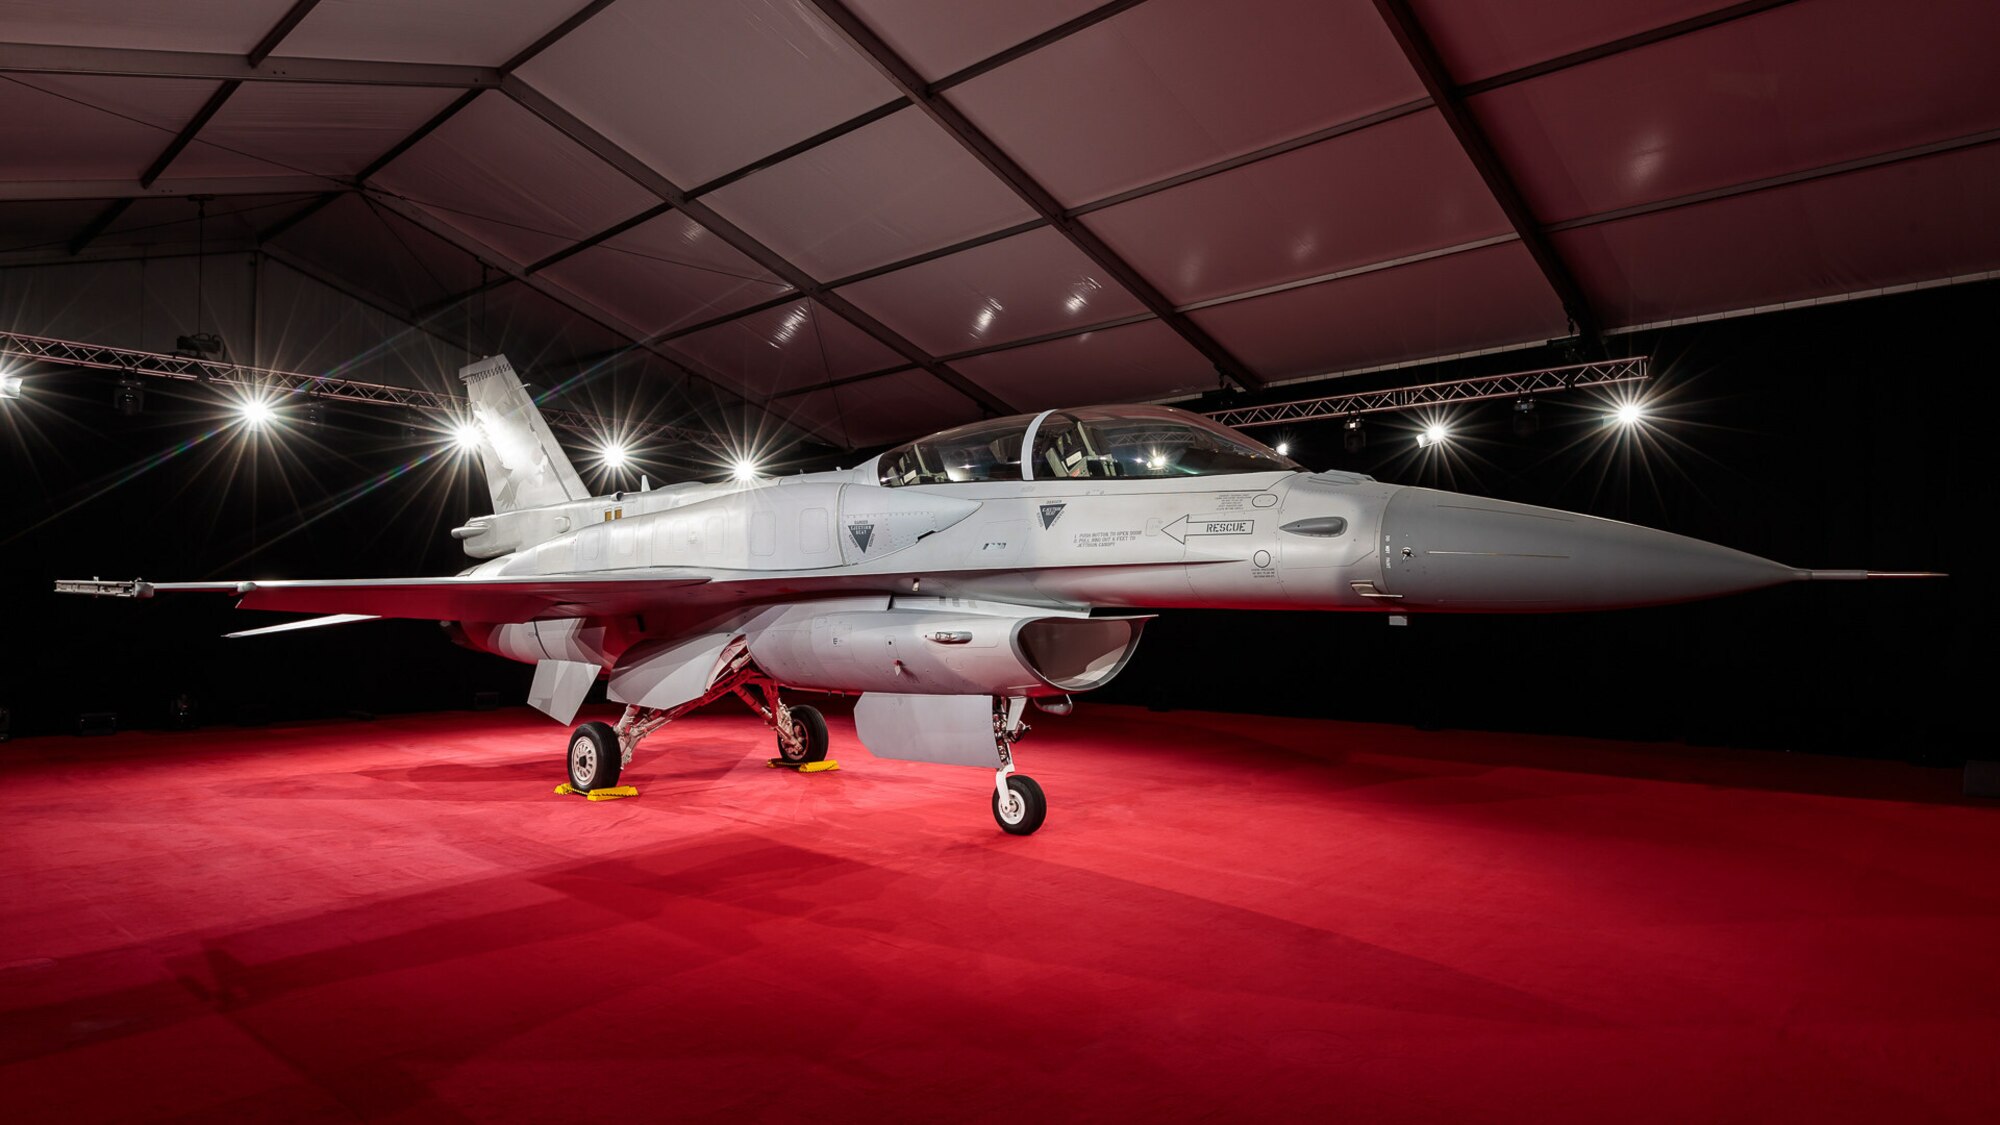 The first Royal Bahraini Air Force F-16 Block 70 was celebrated at Lockheed Martin in Greenville, South Carolina on March 10. Lockheed Martin photo.